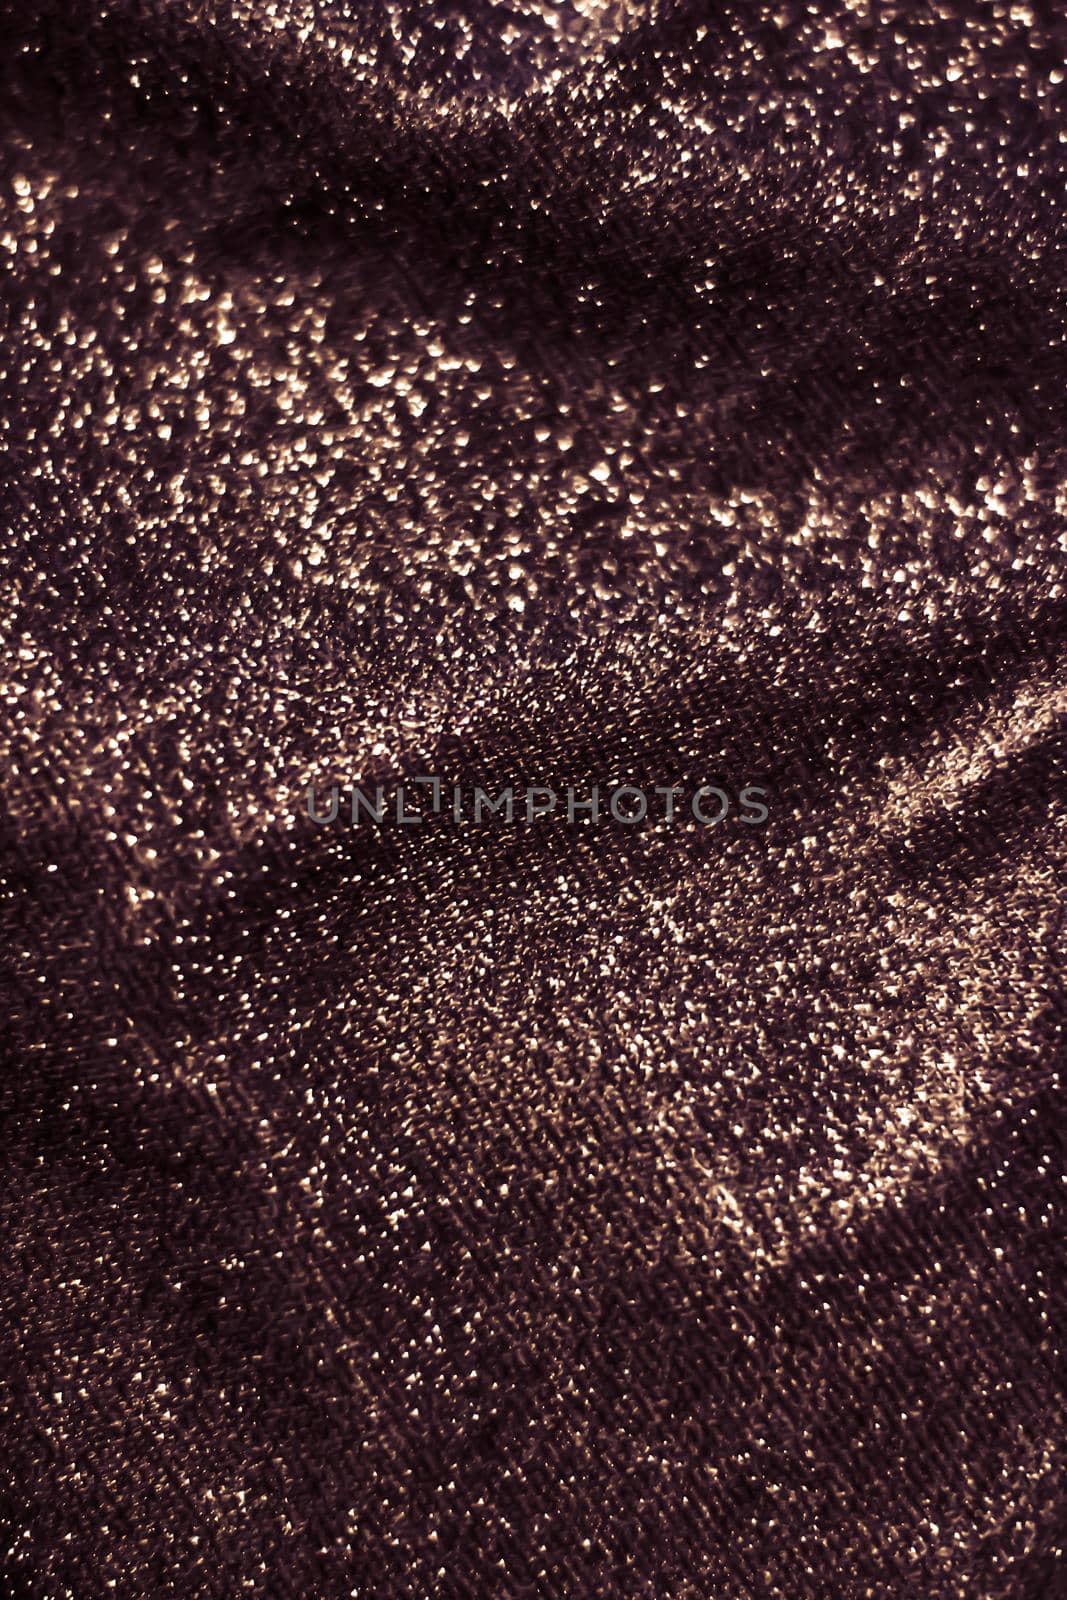 Luxe glowing texture, night club branding and New Years party concept - Copper holiday sparkling glitter abstract background, luxury shiny fabric material for glamour design and festive invitation